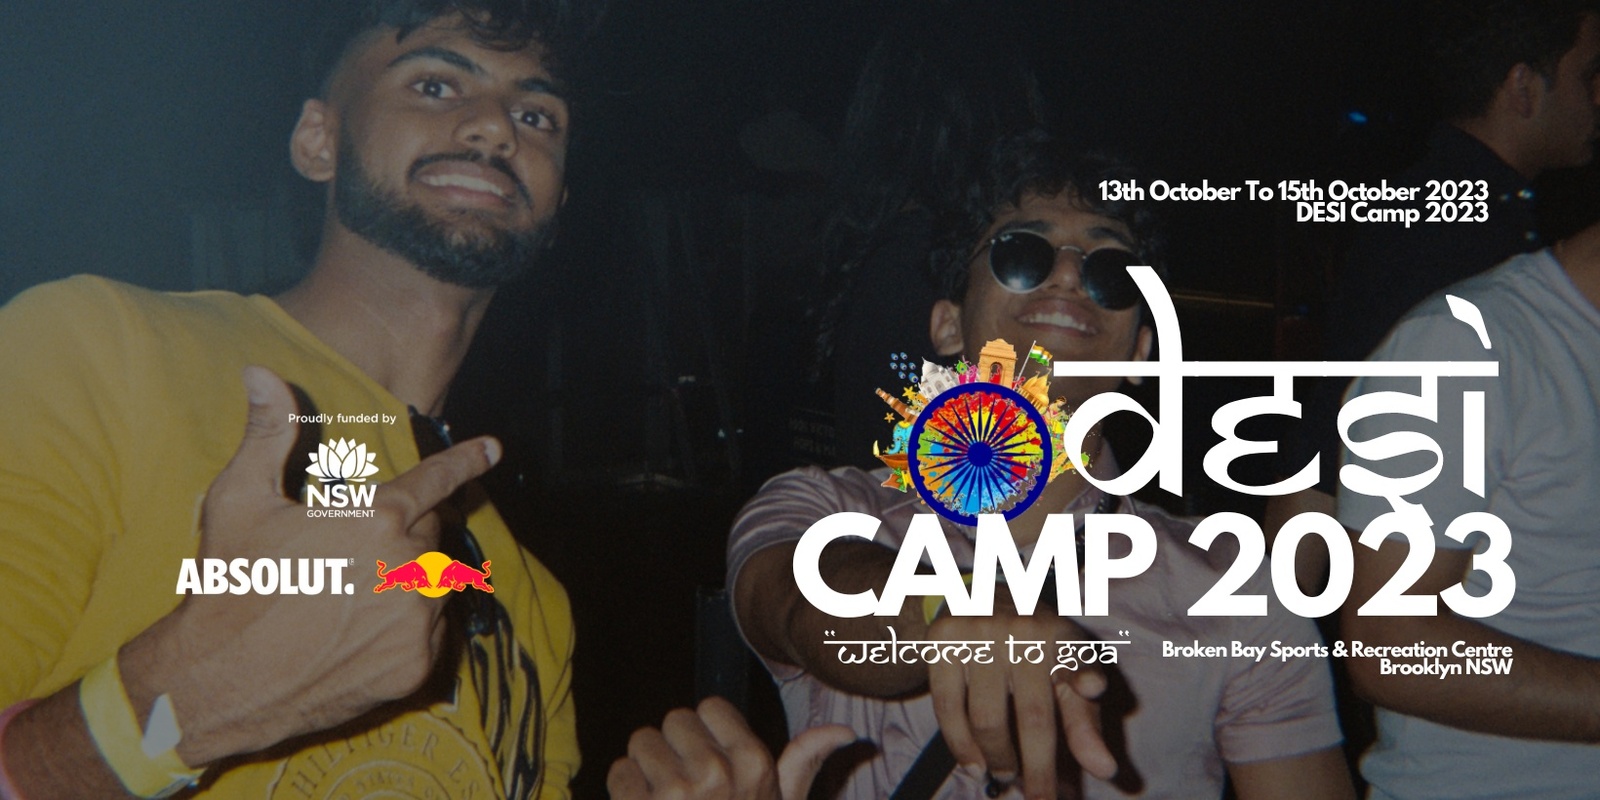 Banner image for DESI Camp 2023 - "Welcome To Goa"